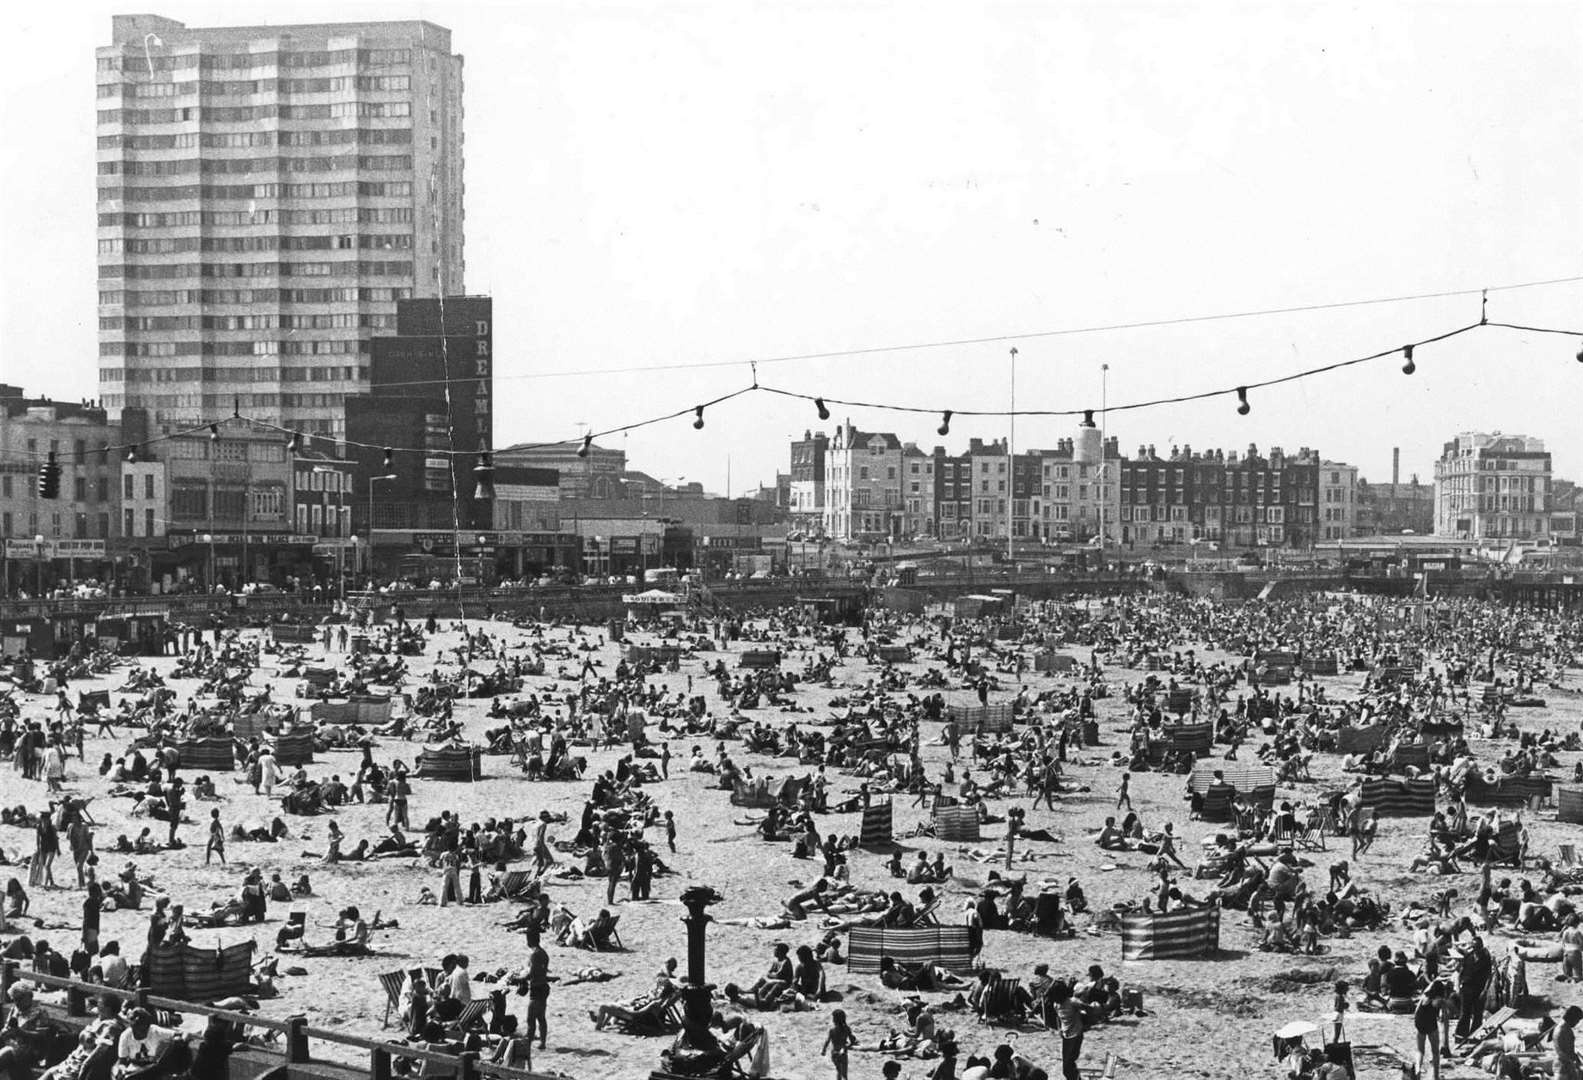 Summer 1976: Thousands flock to Margate in August 1976 during the hottest summer on record